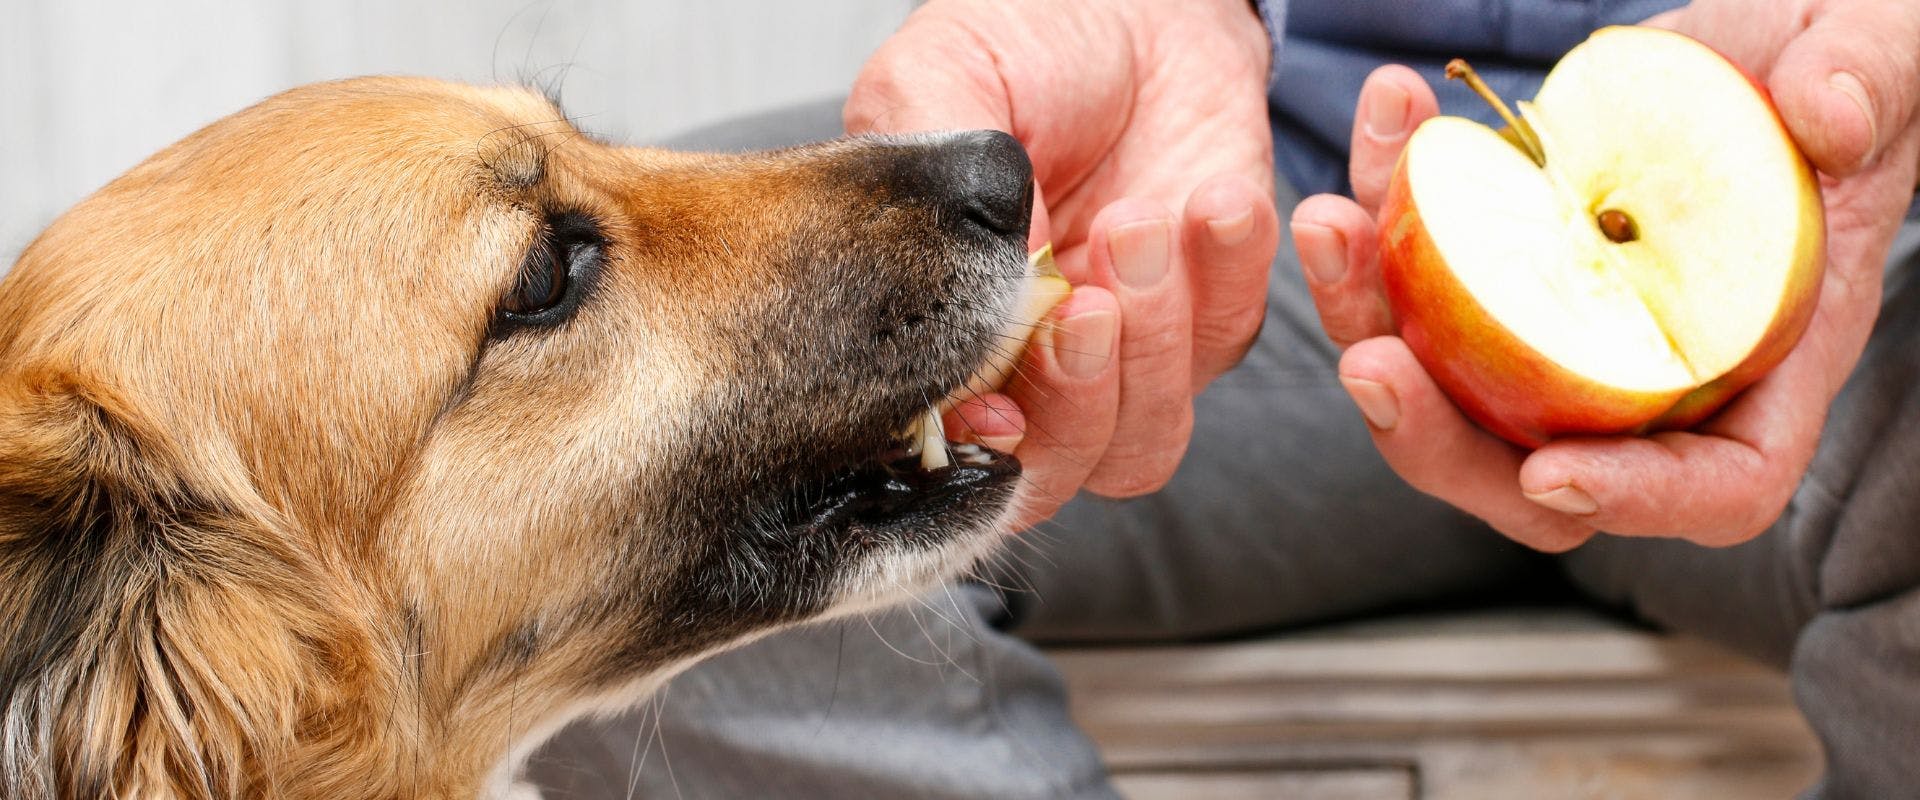 Dog eating apple from person's hand